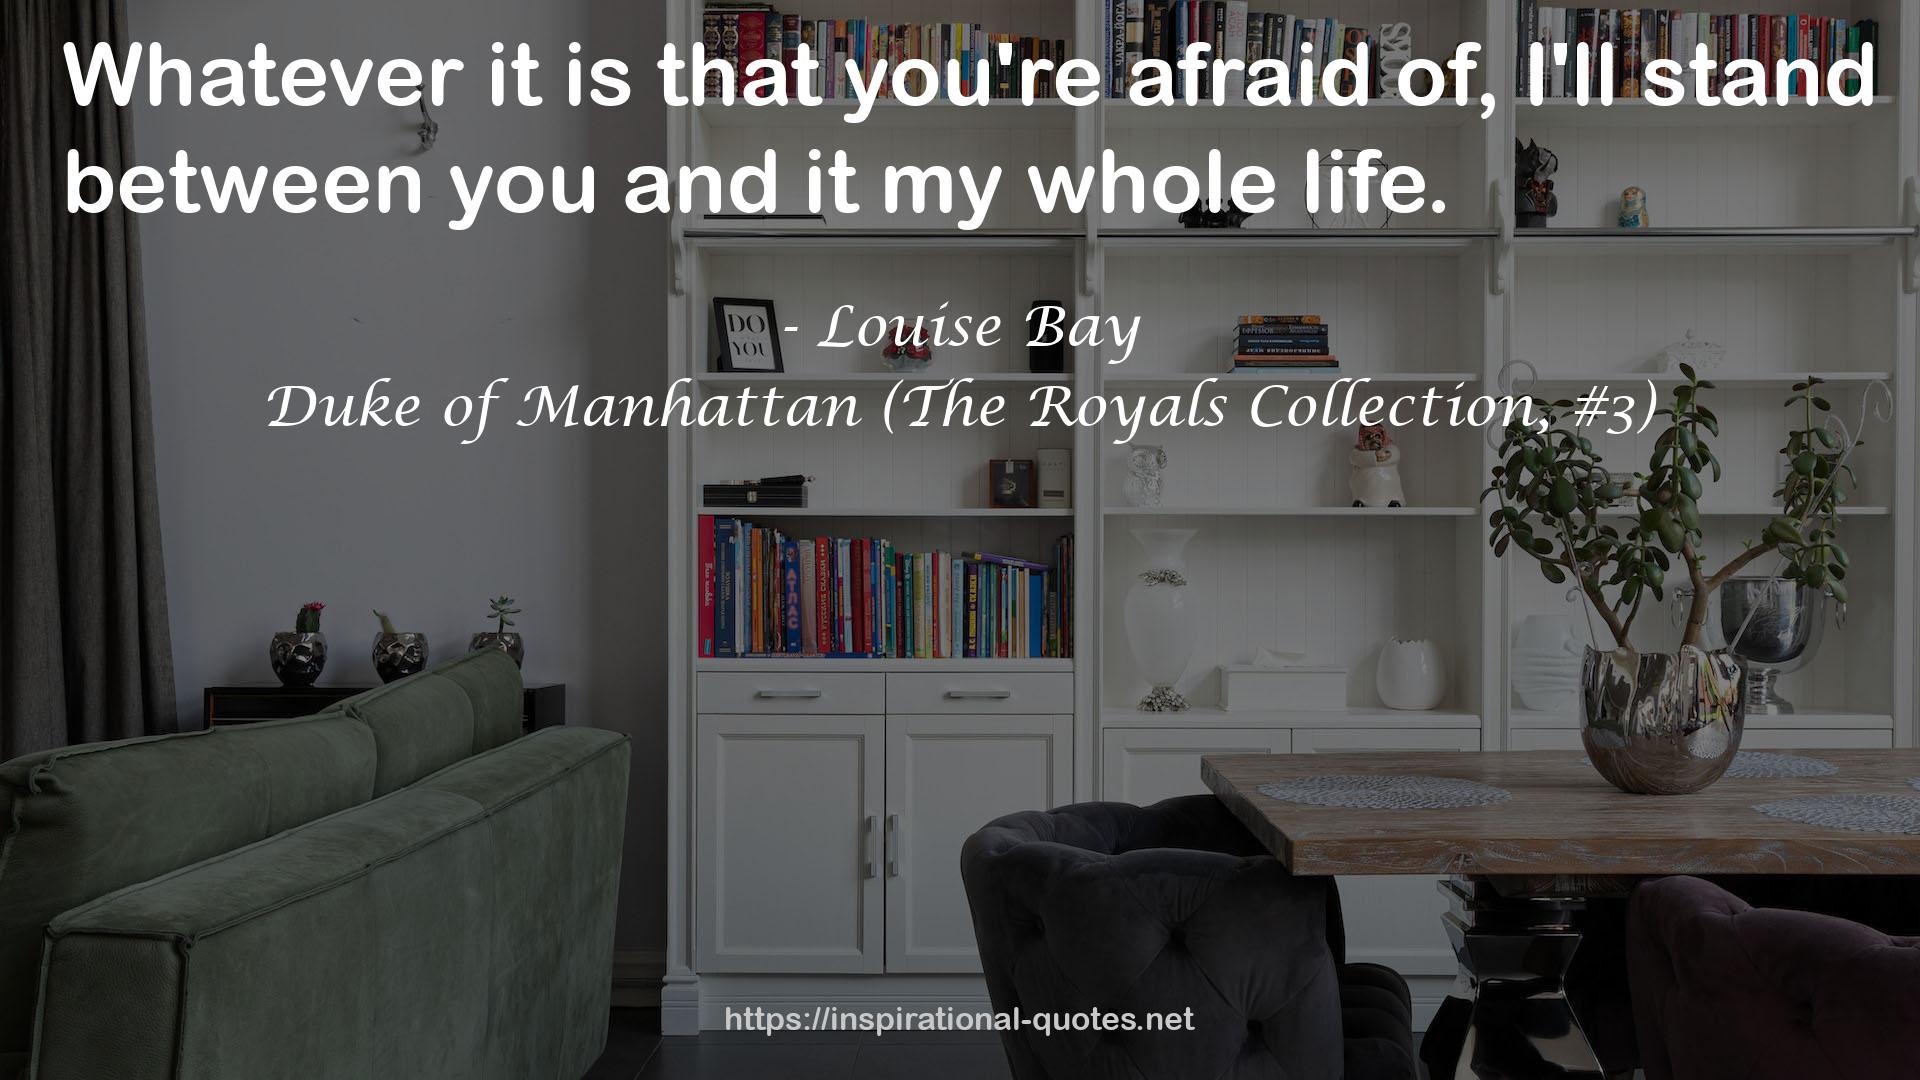 Duke of Manhattan (The Royals Collection, #3) QUOTES